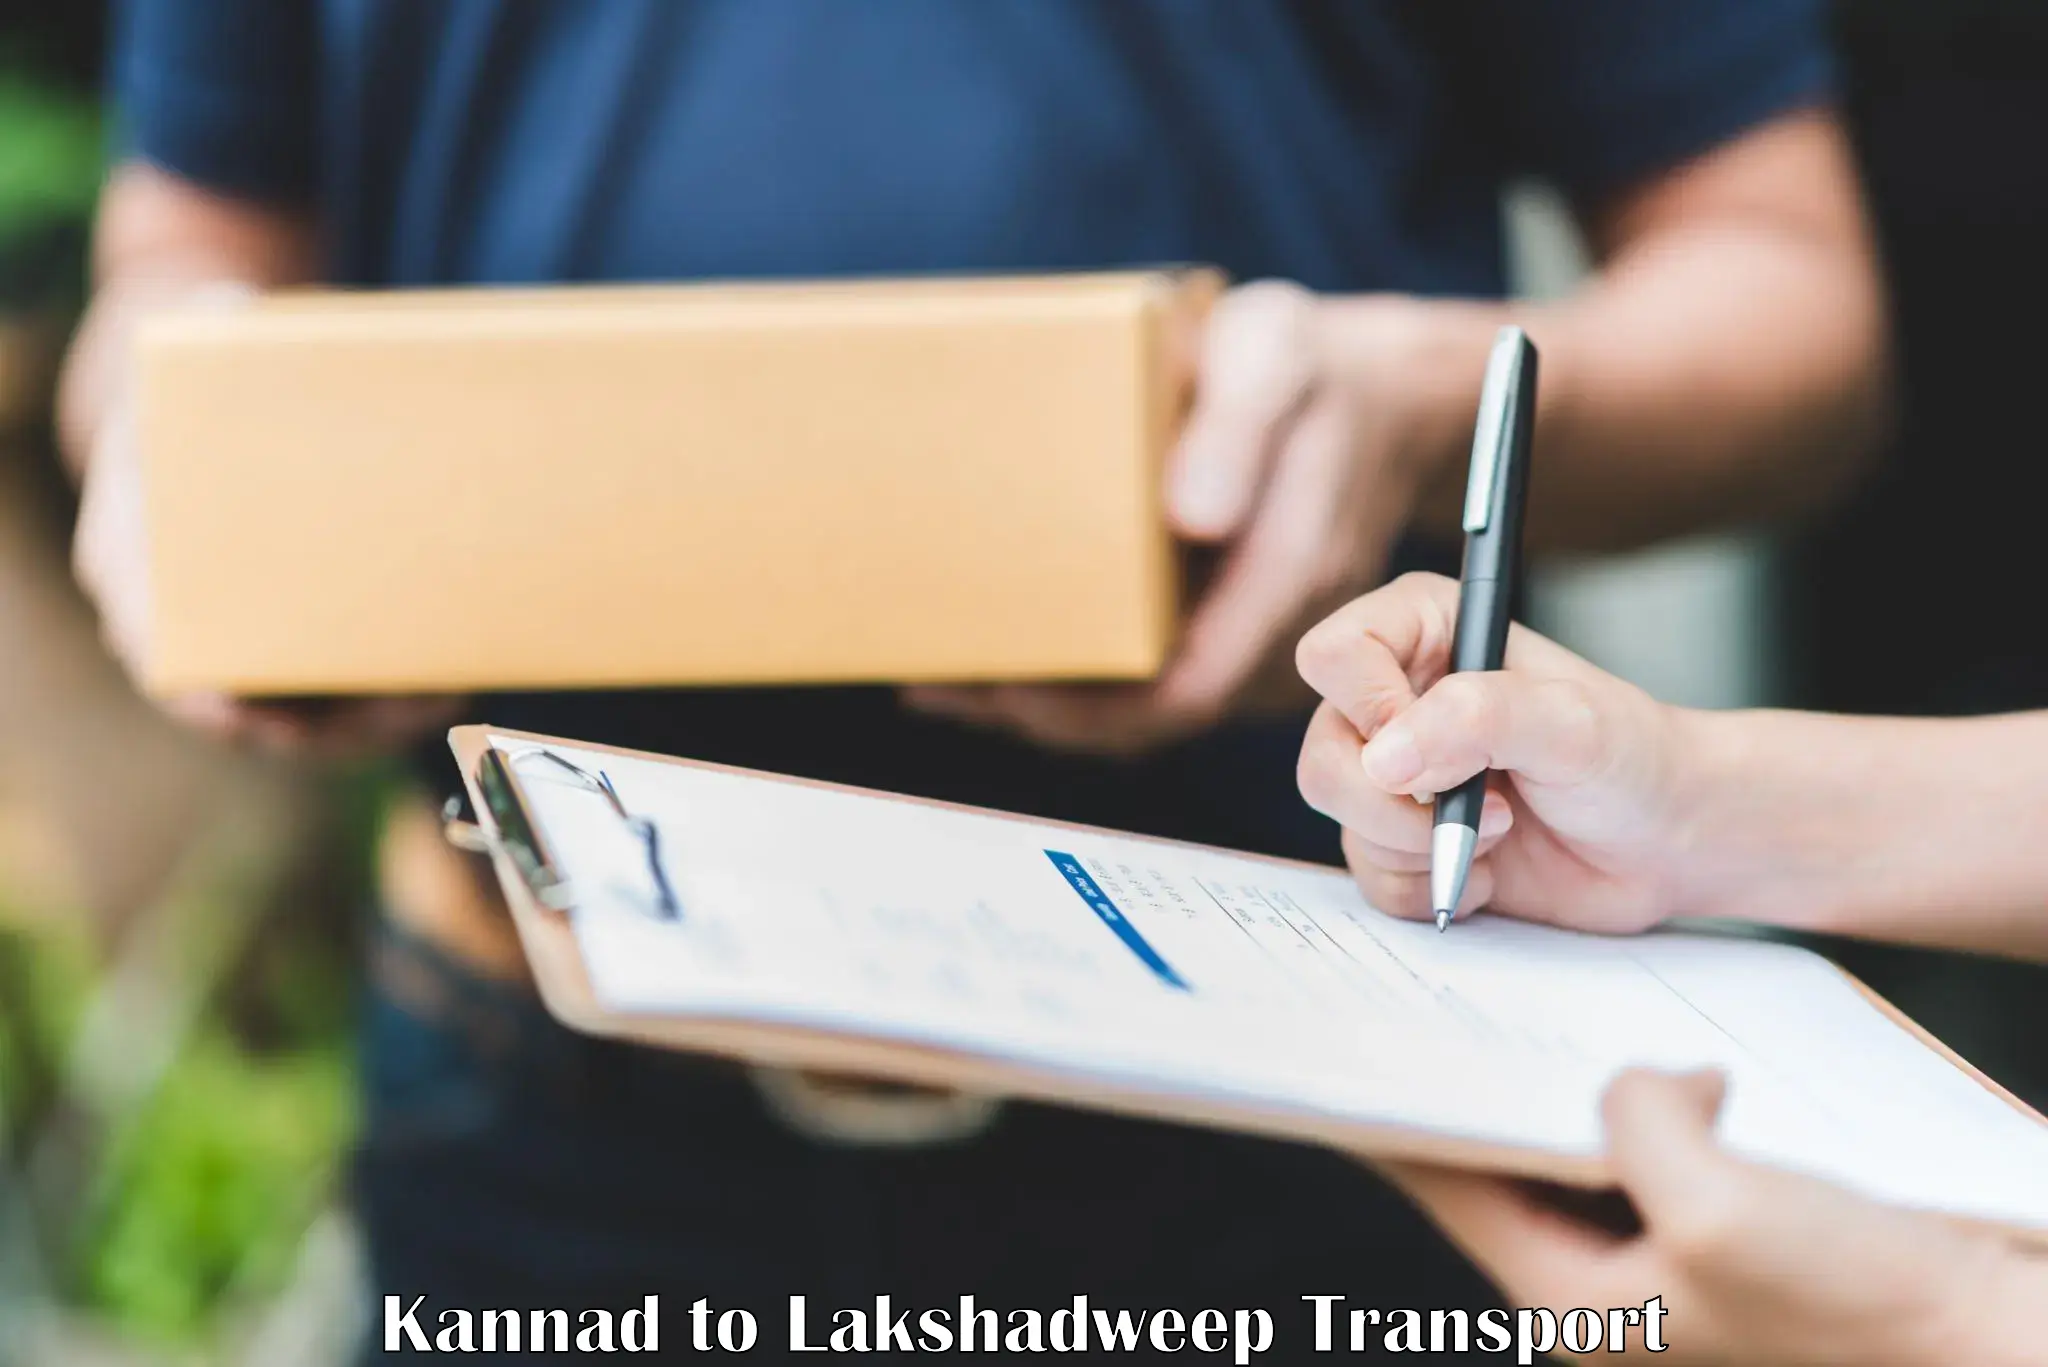 Nationwide transport services Kannad to Lakshadweep